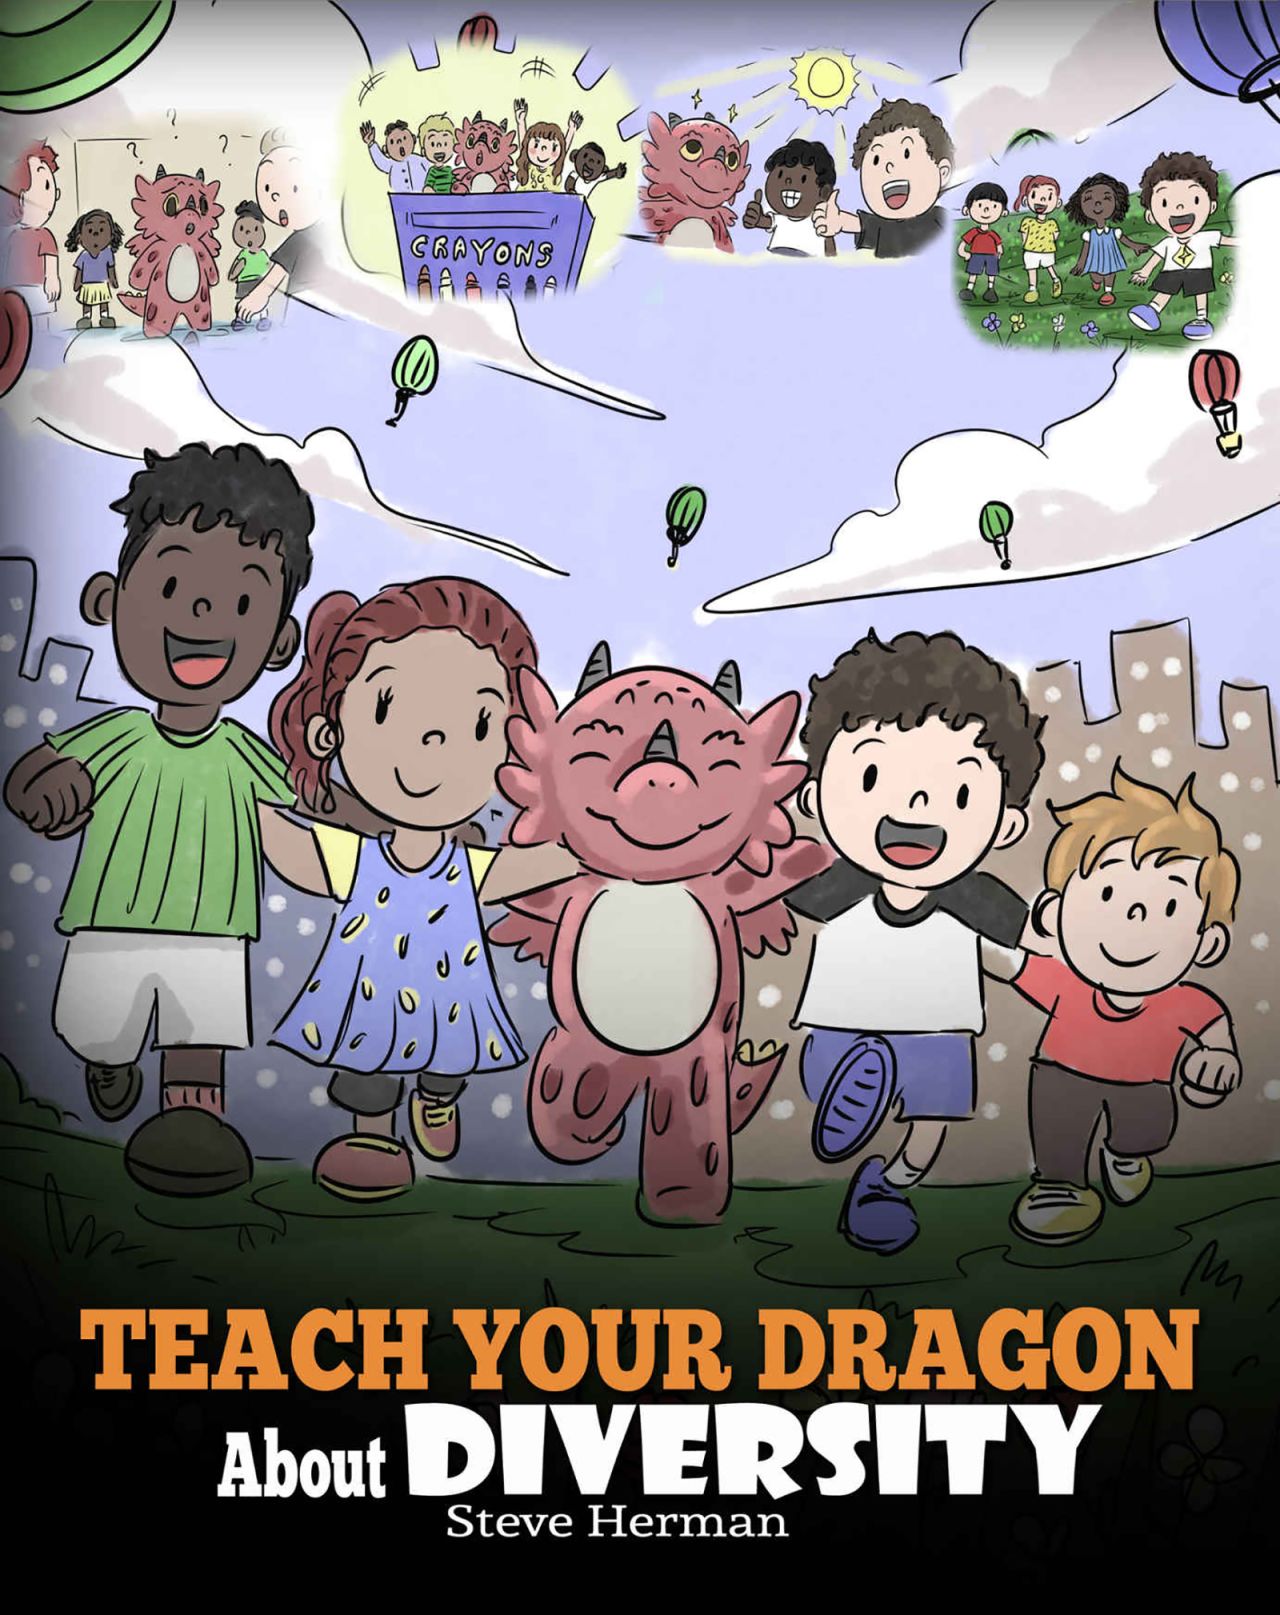 In "Teach Your Dragon About Diversity," Steve Herman teaches dragons that their skin color or wing differences make them beautiful. 